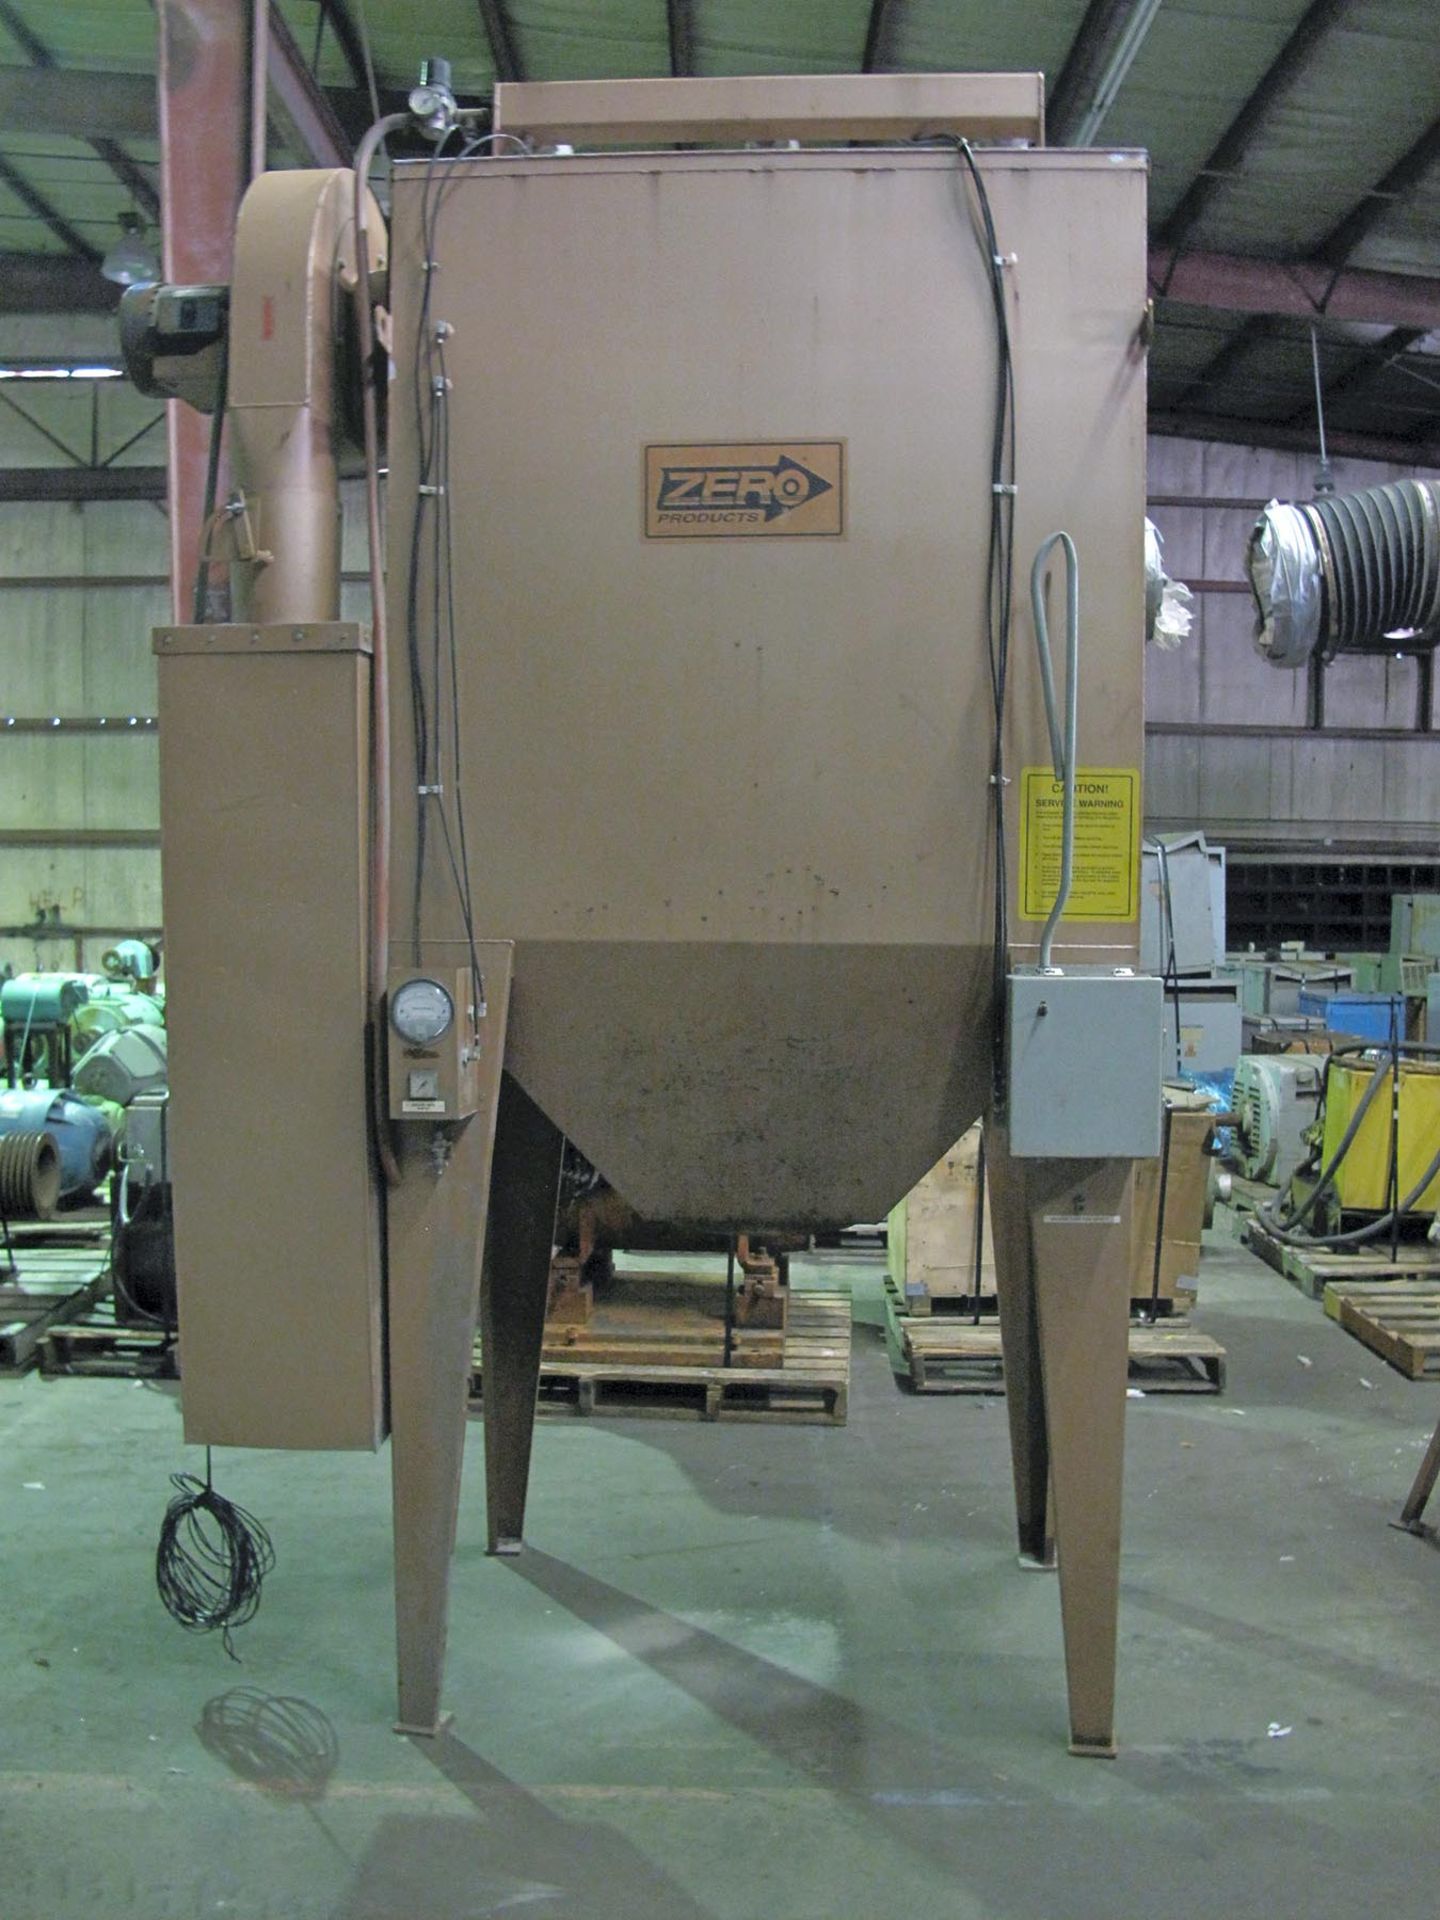 ABRASIVE BLAST MACHINE, CLEMCO INDUSTRIES MDL. 1642, 2.0 cu. ft. cap., Clemco Industries side - Image 4 of 8